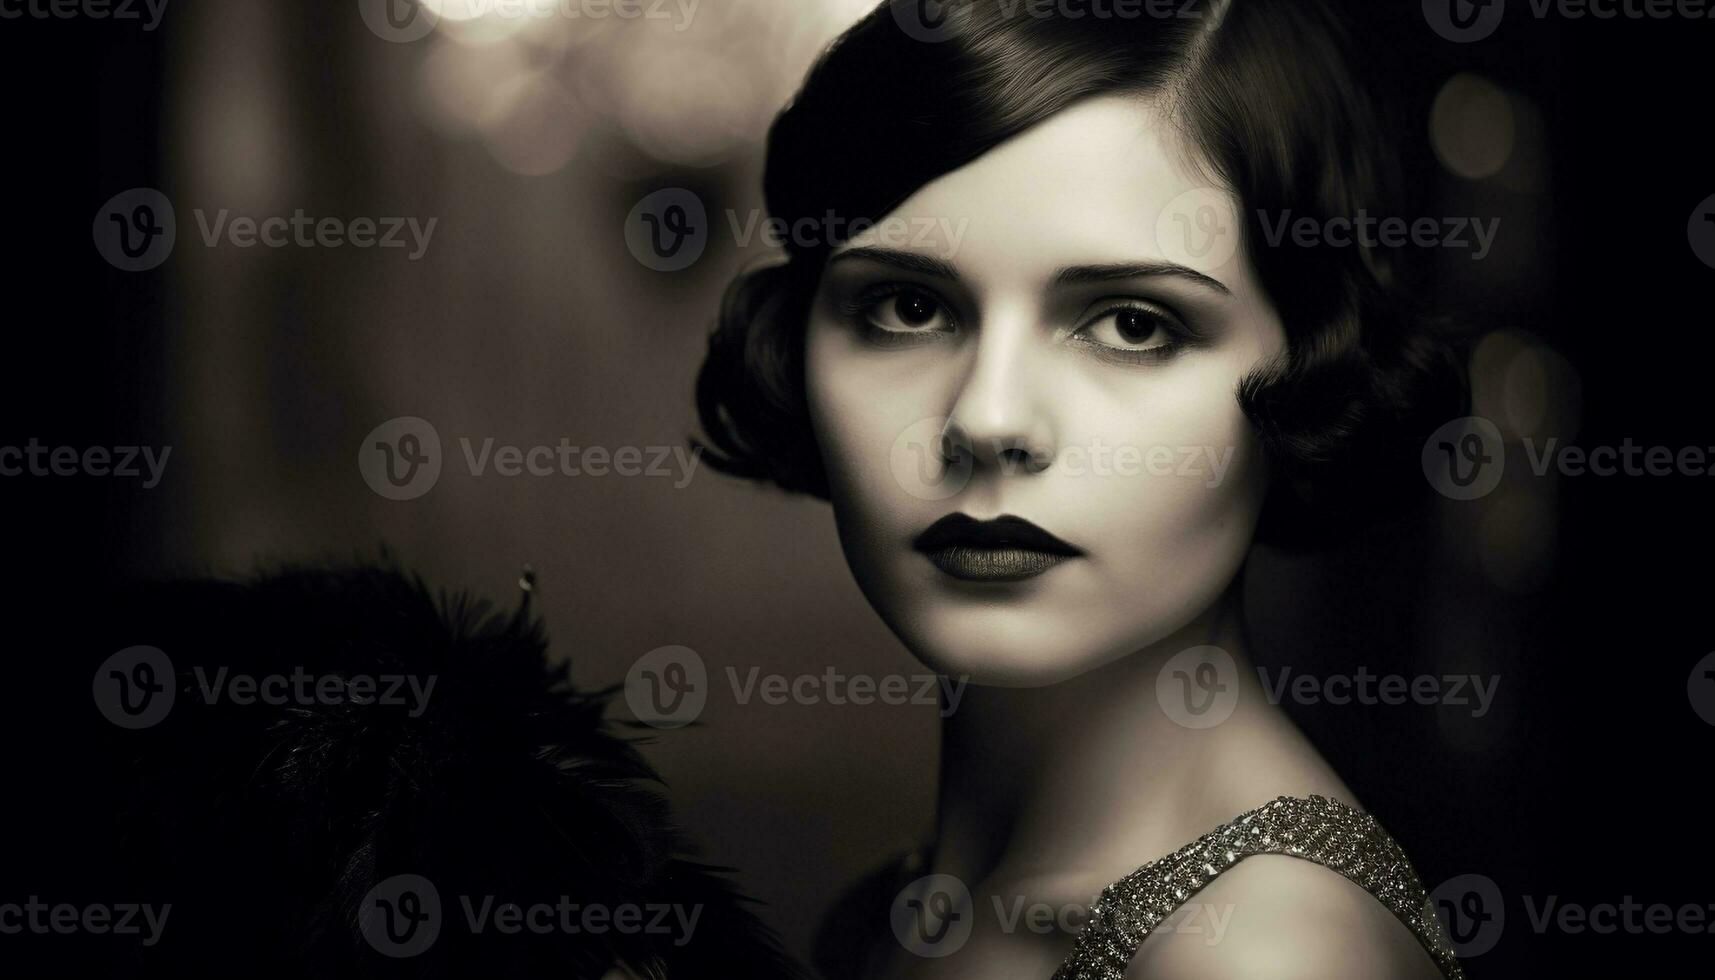 Beautiful woman, elegance and sensuality in monochrome fine art portrait generated by AI photo